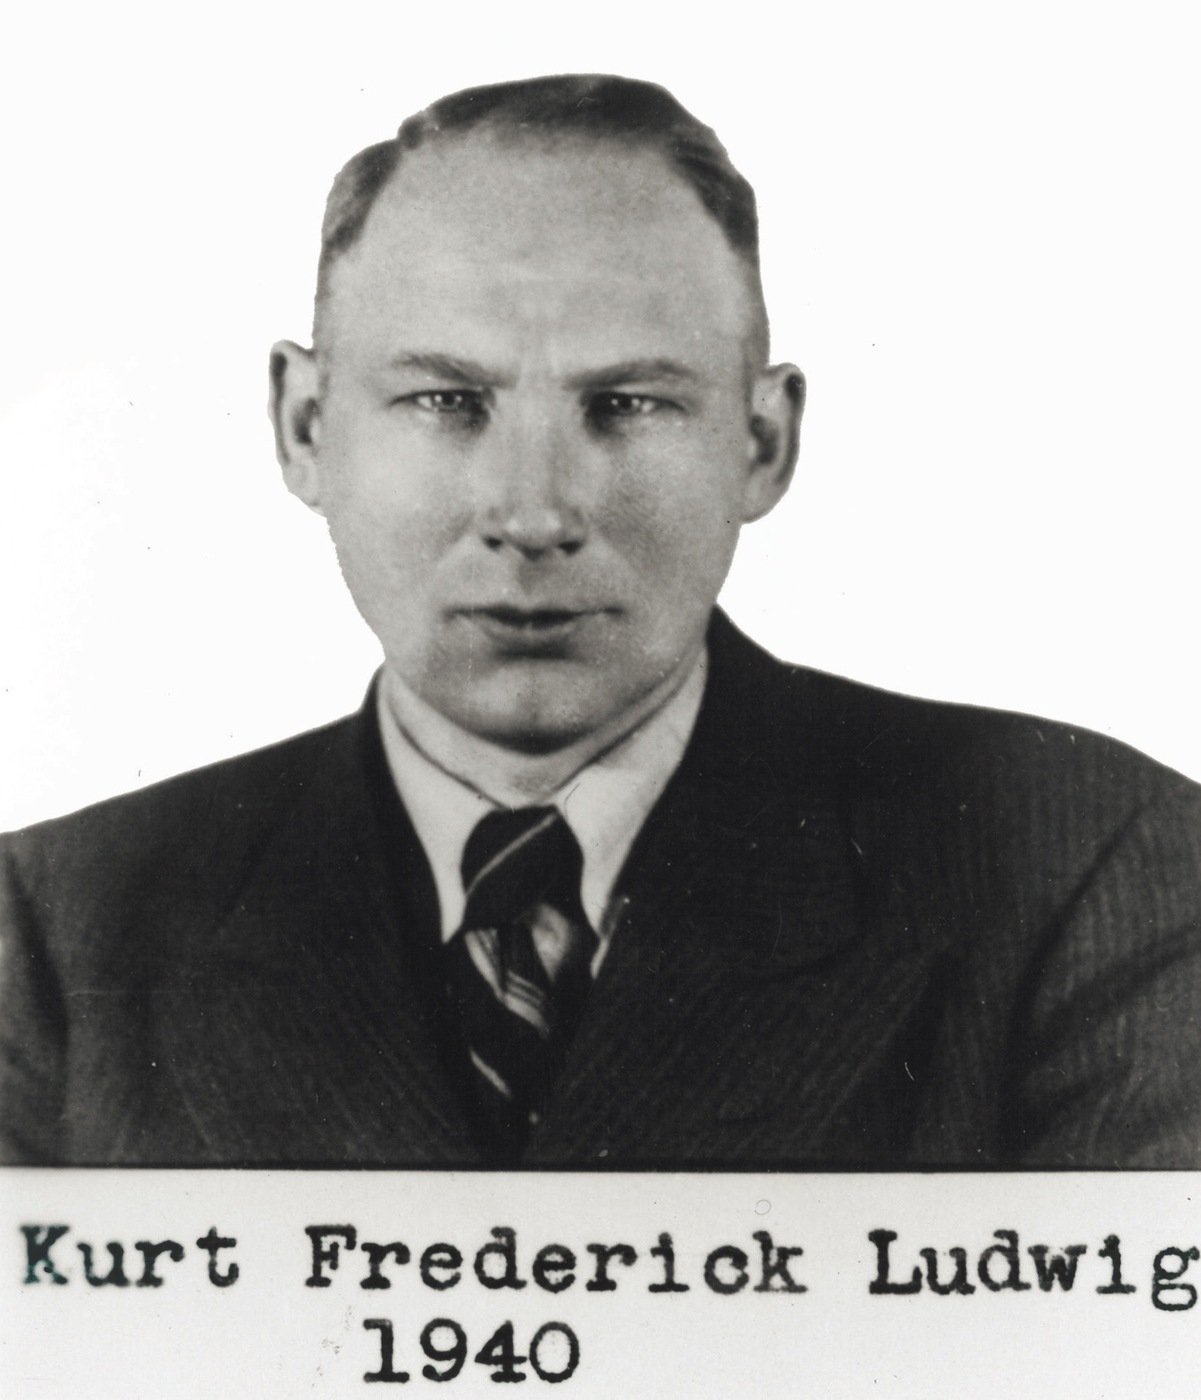 Kurt Frederick Ludwig, head of a German espionage ring during World War II. Ludwig was arrested by the FBI in 1941, and the last member of his spy ring was captured in 1946. The Germans had sent Ludwig to the U.S. in March 1940 to set up a ring of young, industrious agents who could gather information about U.S. troops, U.S. order of battle, and U.S. manufacturing.